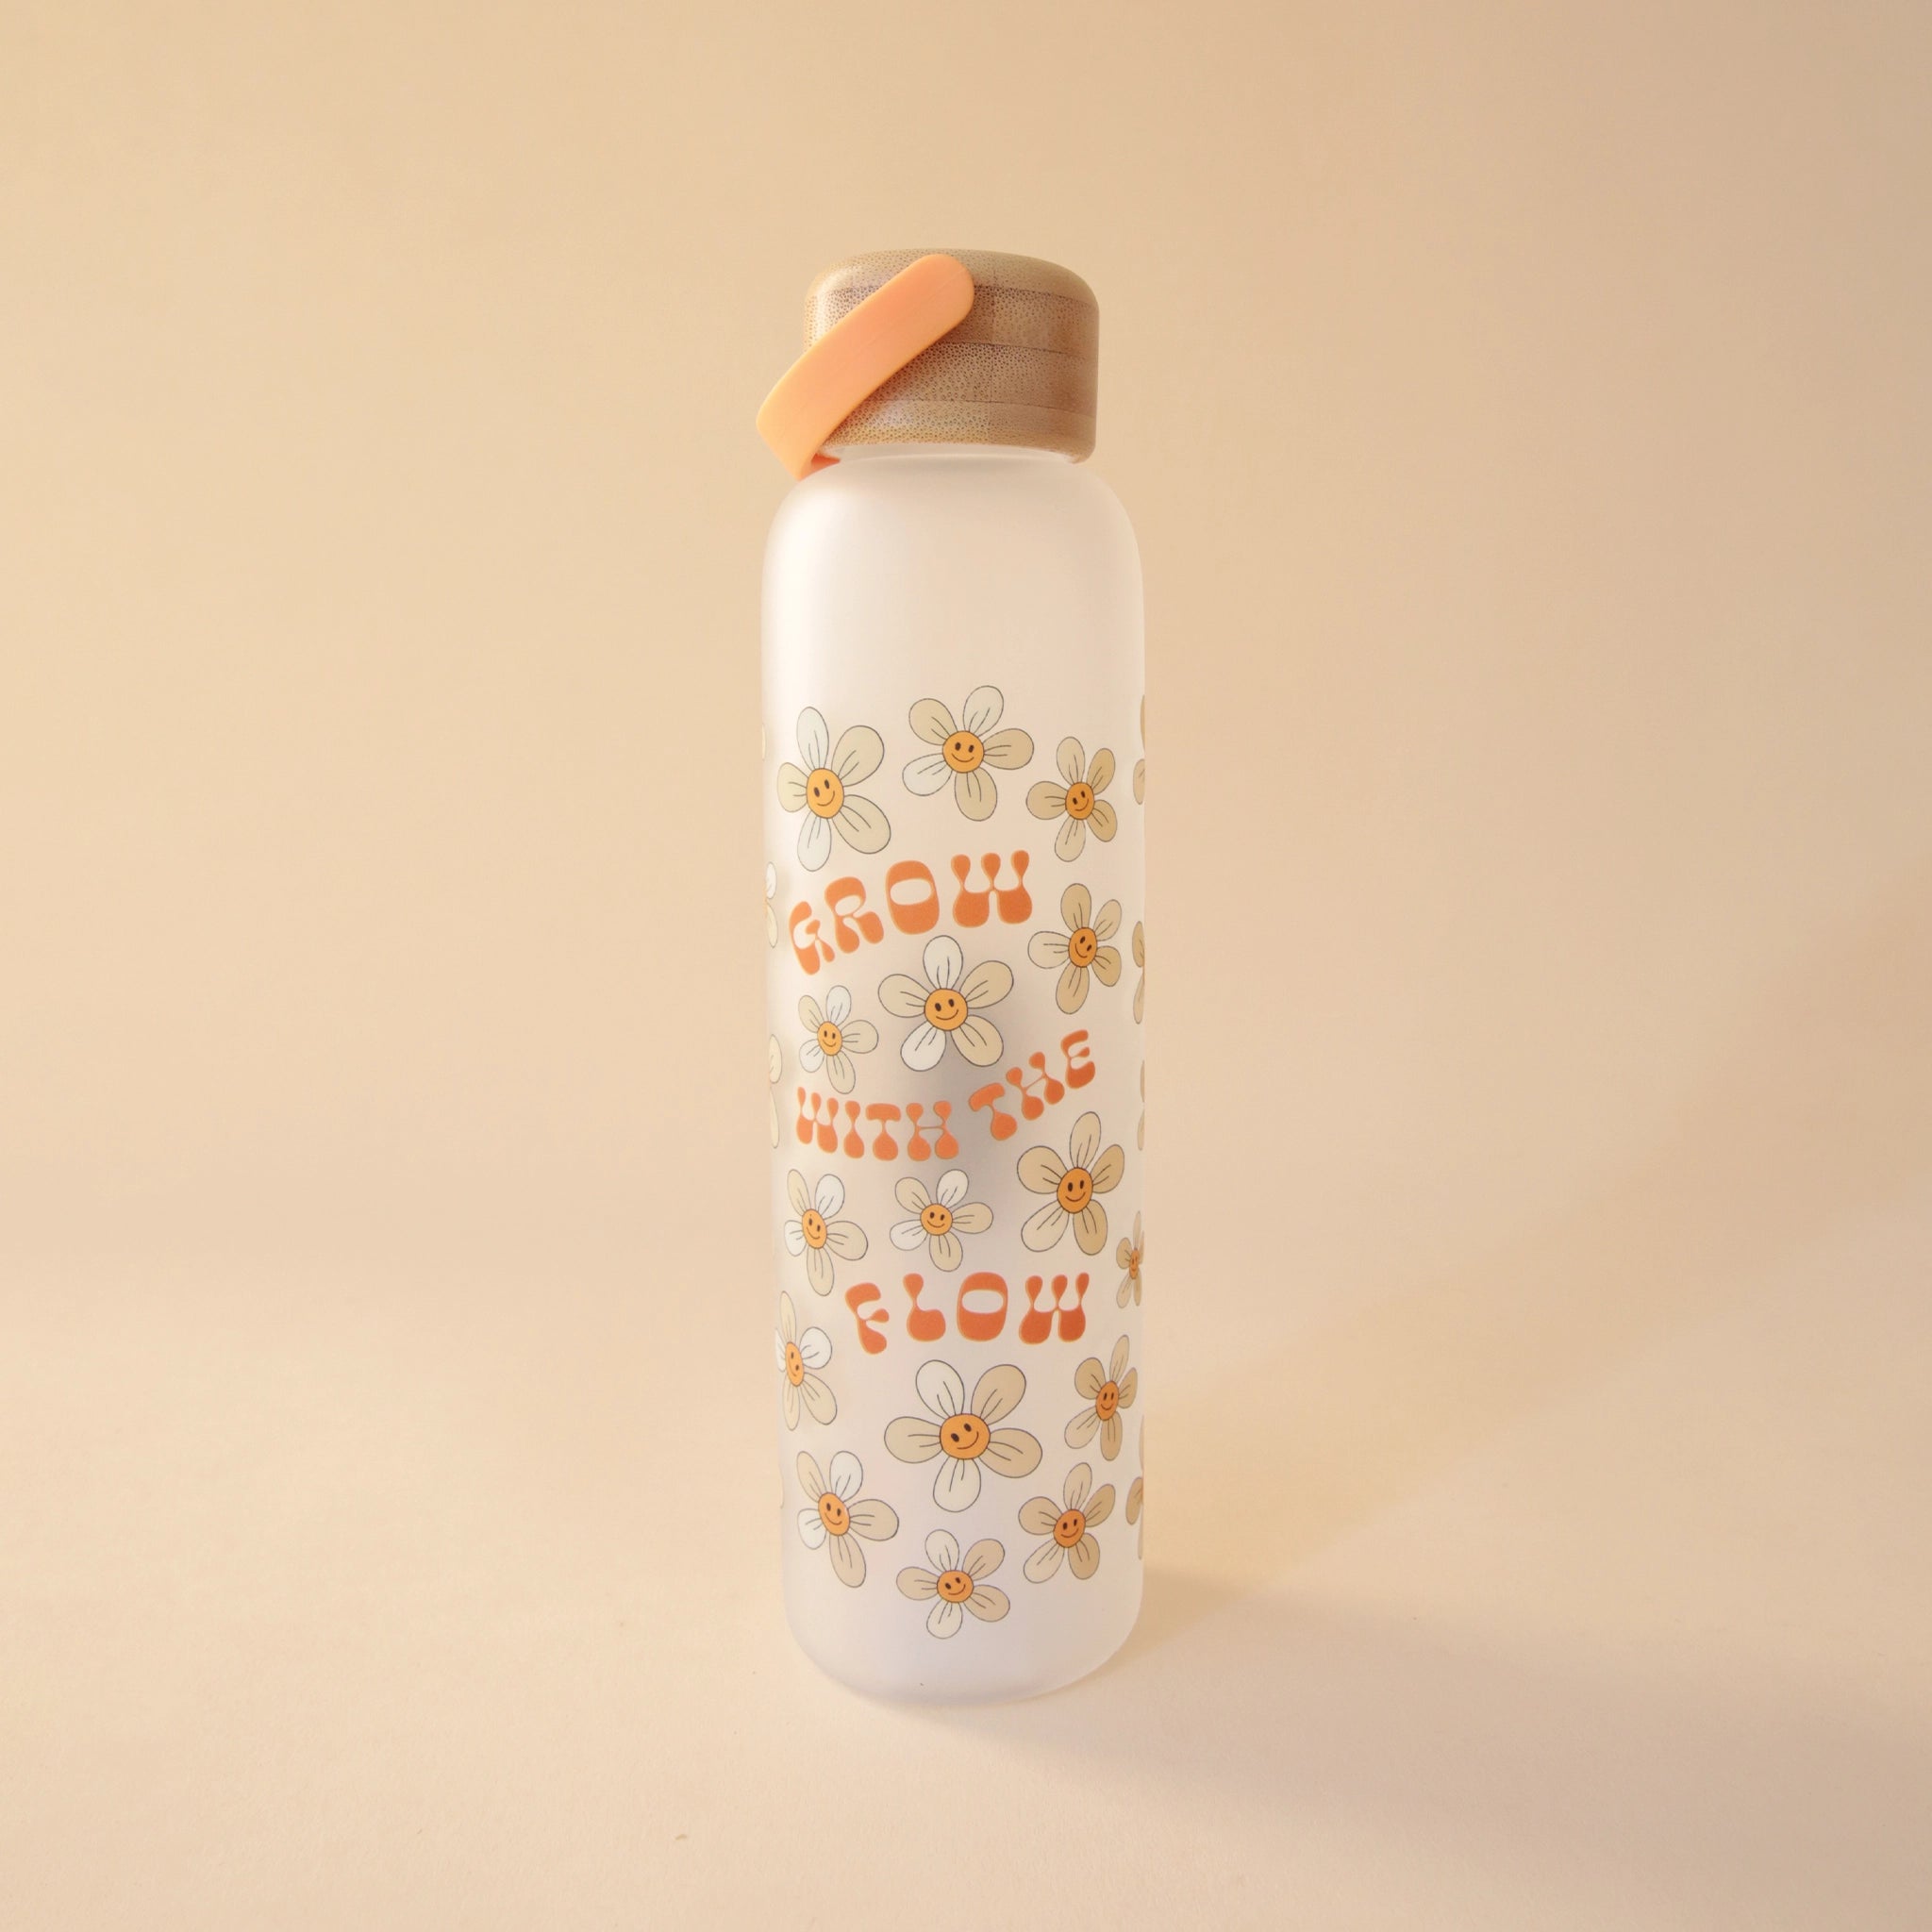 A tall and thin glass water bottle with a wood lid a tangerine handle and text on the front that reads, "Grow With The Flow" in groovy orange letters as well as smiley face daisy graphics all around the the words.